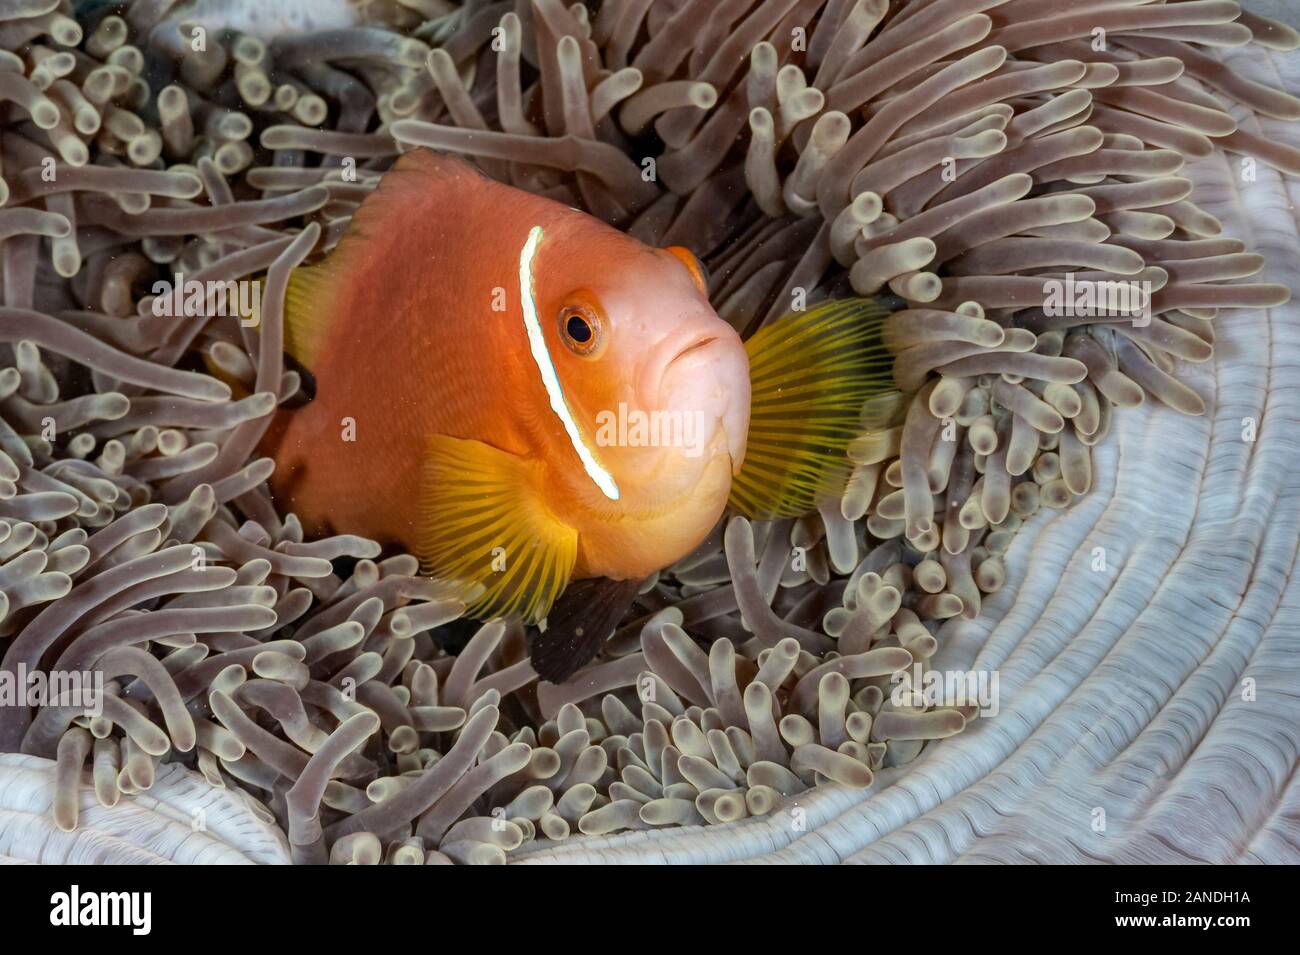 pink anemonefish, Amphiprion perideraion, in its host magnificent sea anemone, Heteractis magnifica, Maldives, Indian Ocean Stock Photo